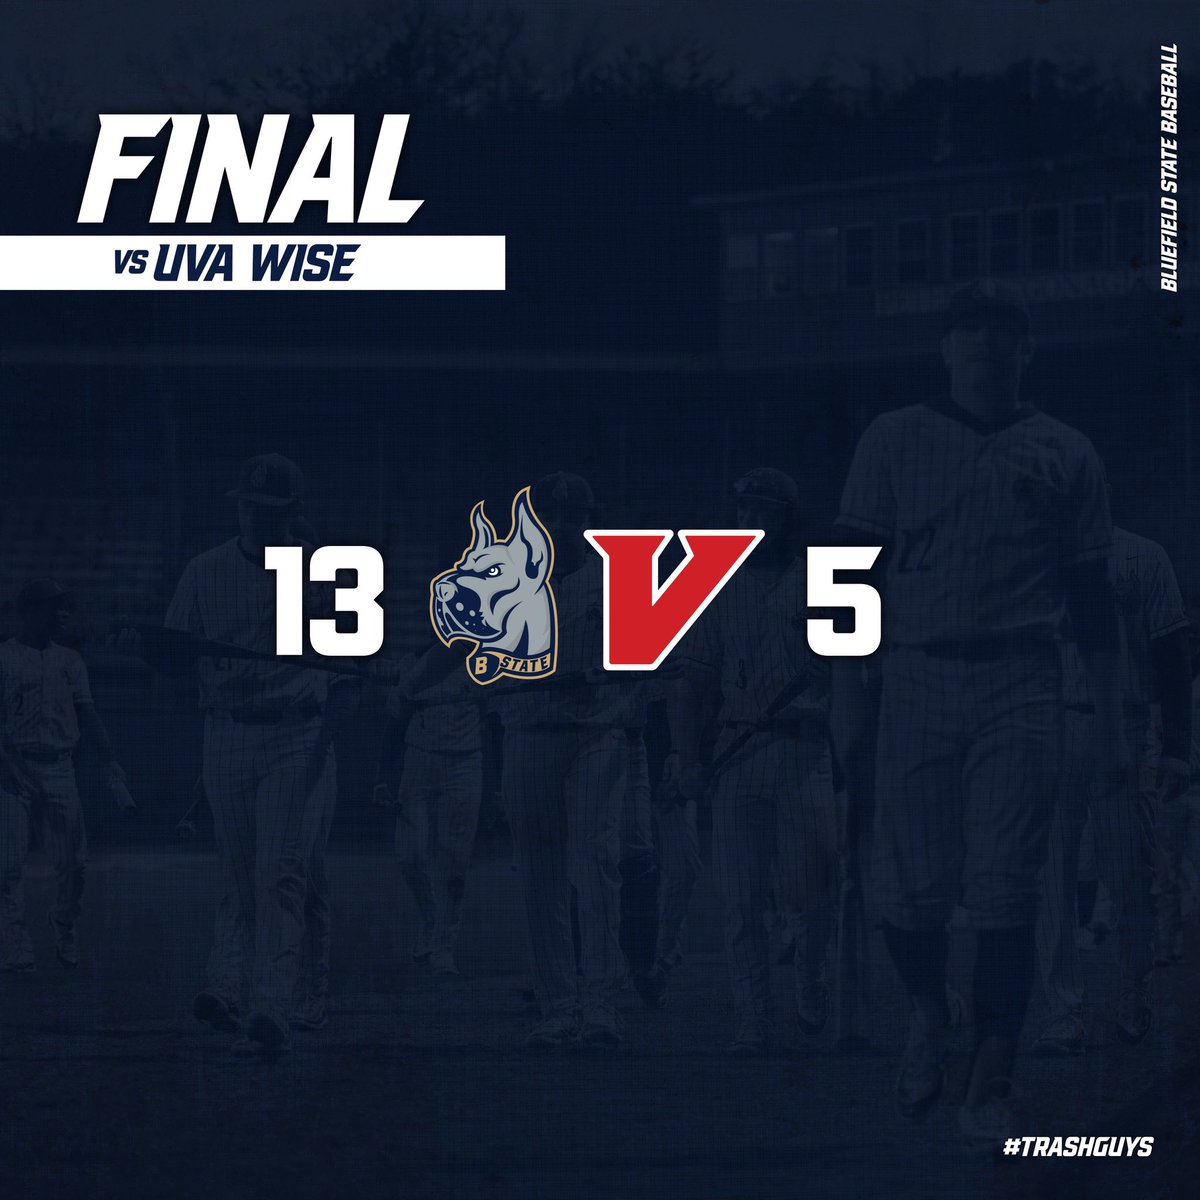 Your Big Blue take the series over UVA-Wise and move to 22-11 on the year. Next up- 3 game set in New Orleans against Division 1 University of New Orleans on ESPN plus.